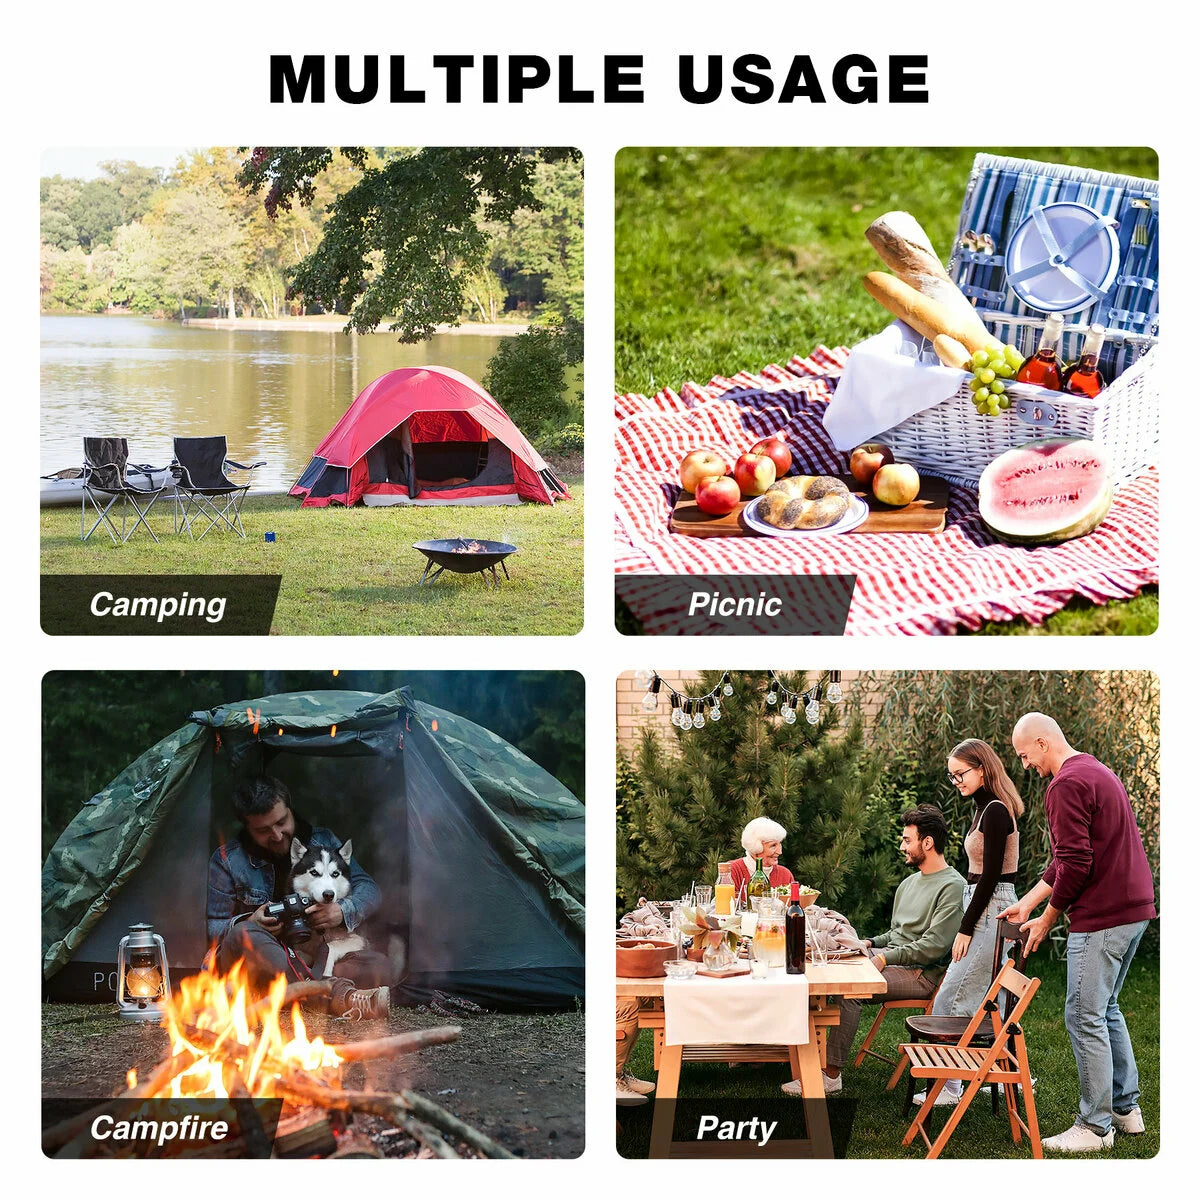 Swivel Campfire Grill Grate with Lamp Holder